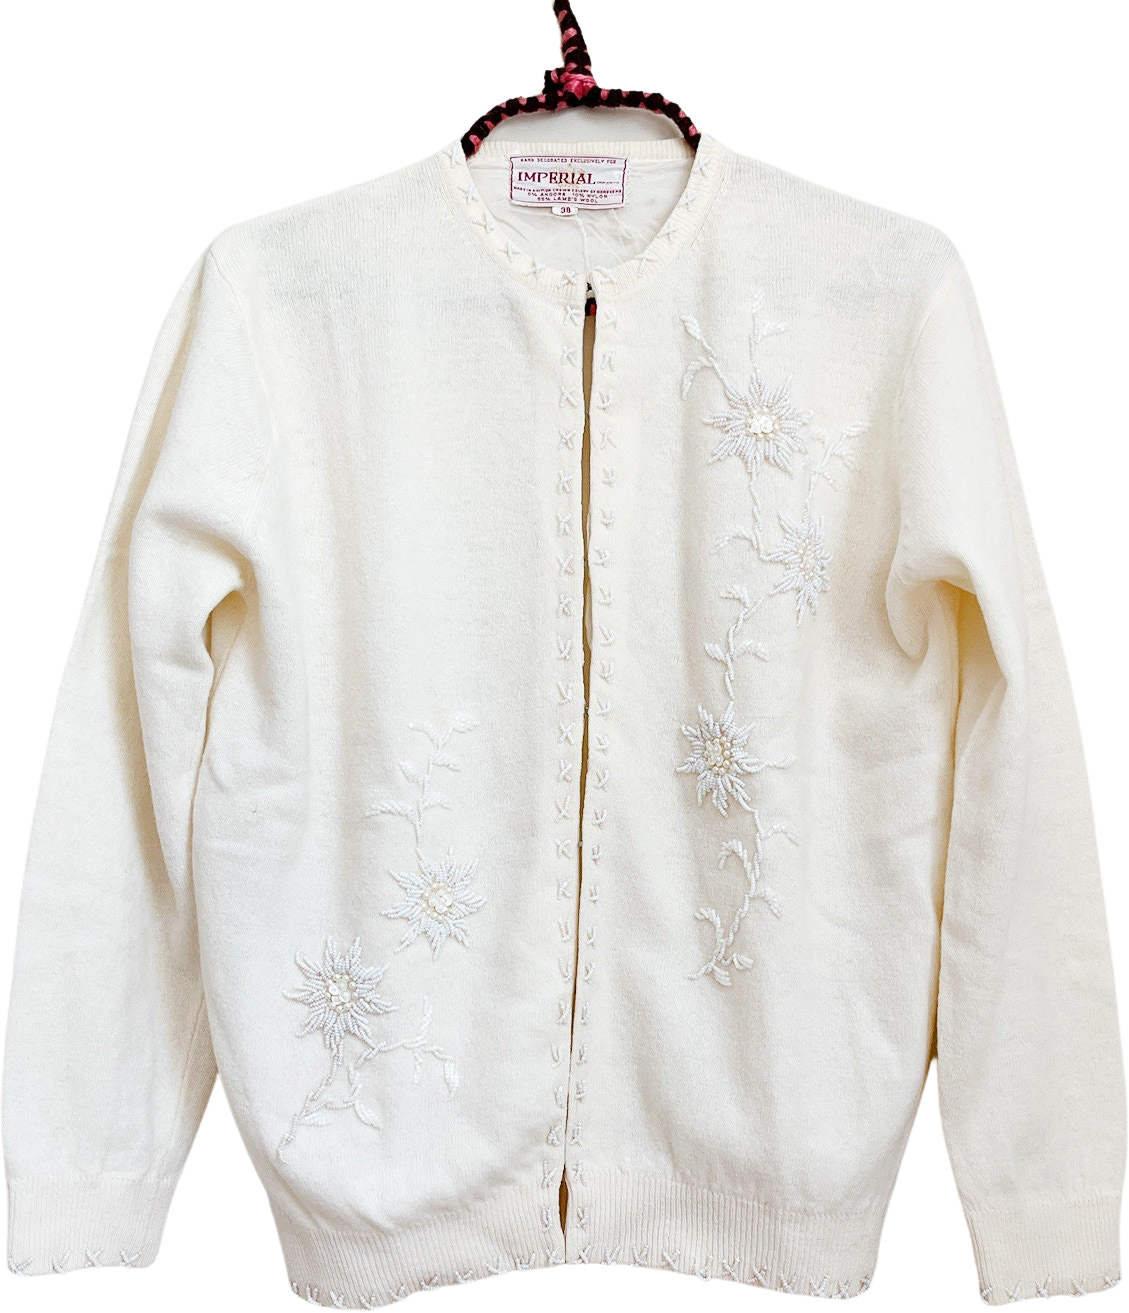 Embroidered and Beaded Lambswool 50s Cardigan Sweater Imperial Imports  Sweaterwith Floral Design 50s Hong Kong by Imperial Imports